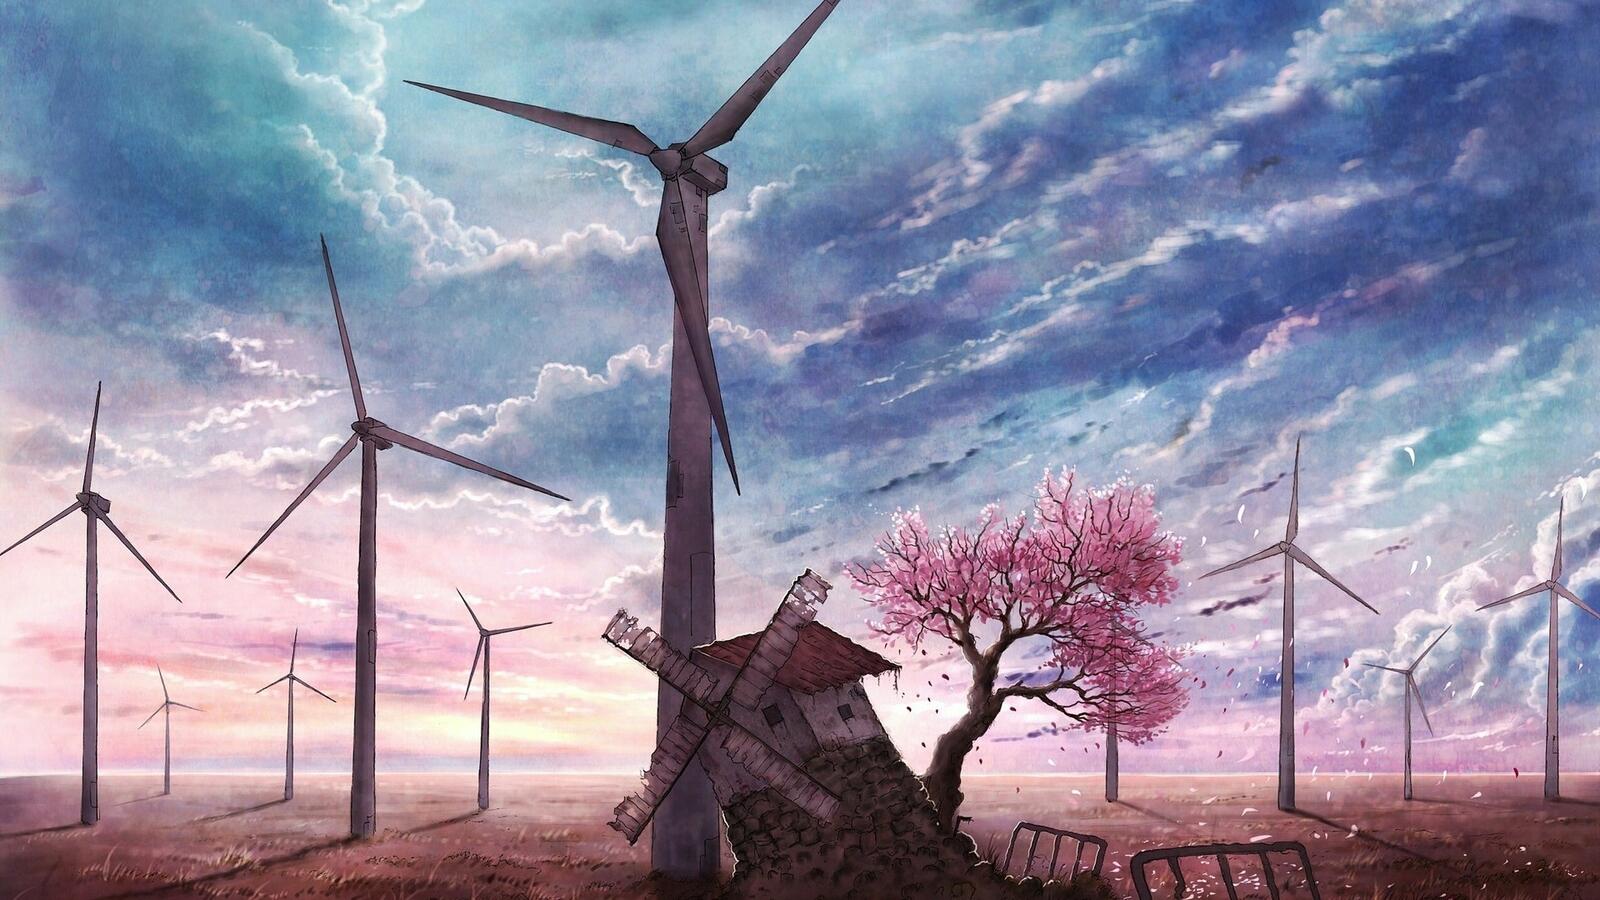 Wallpapers drawing windmill ruins on the desktop